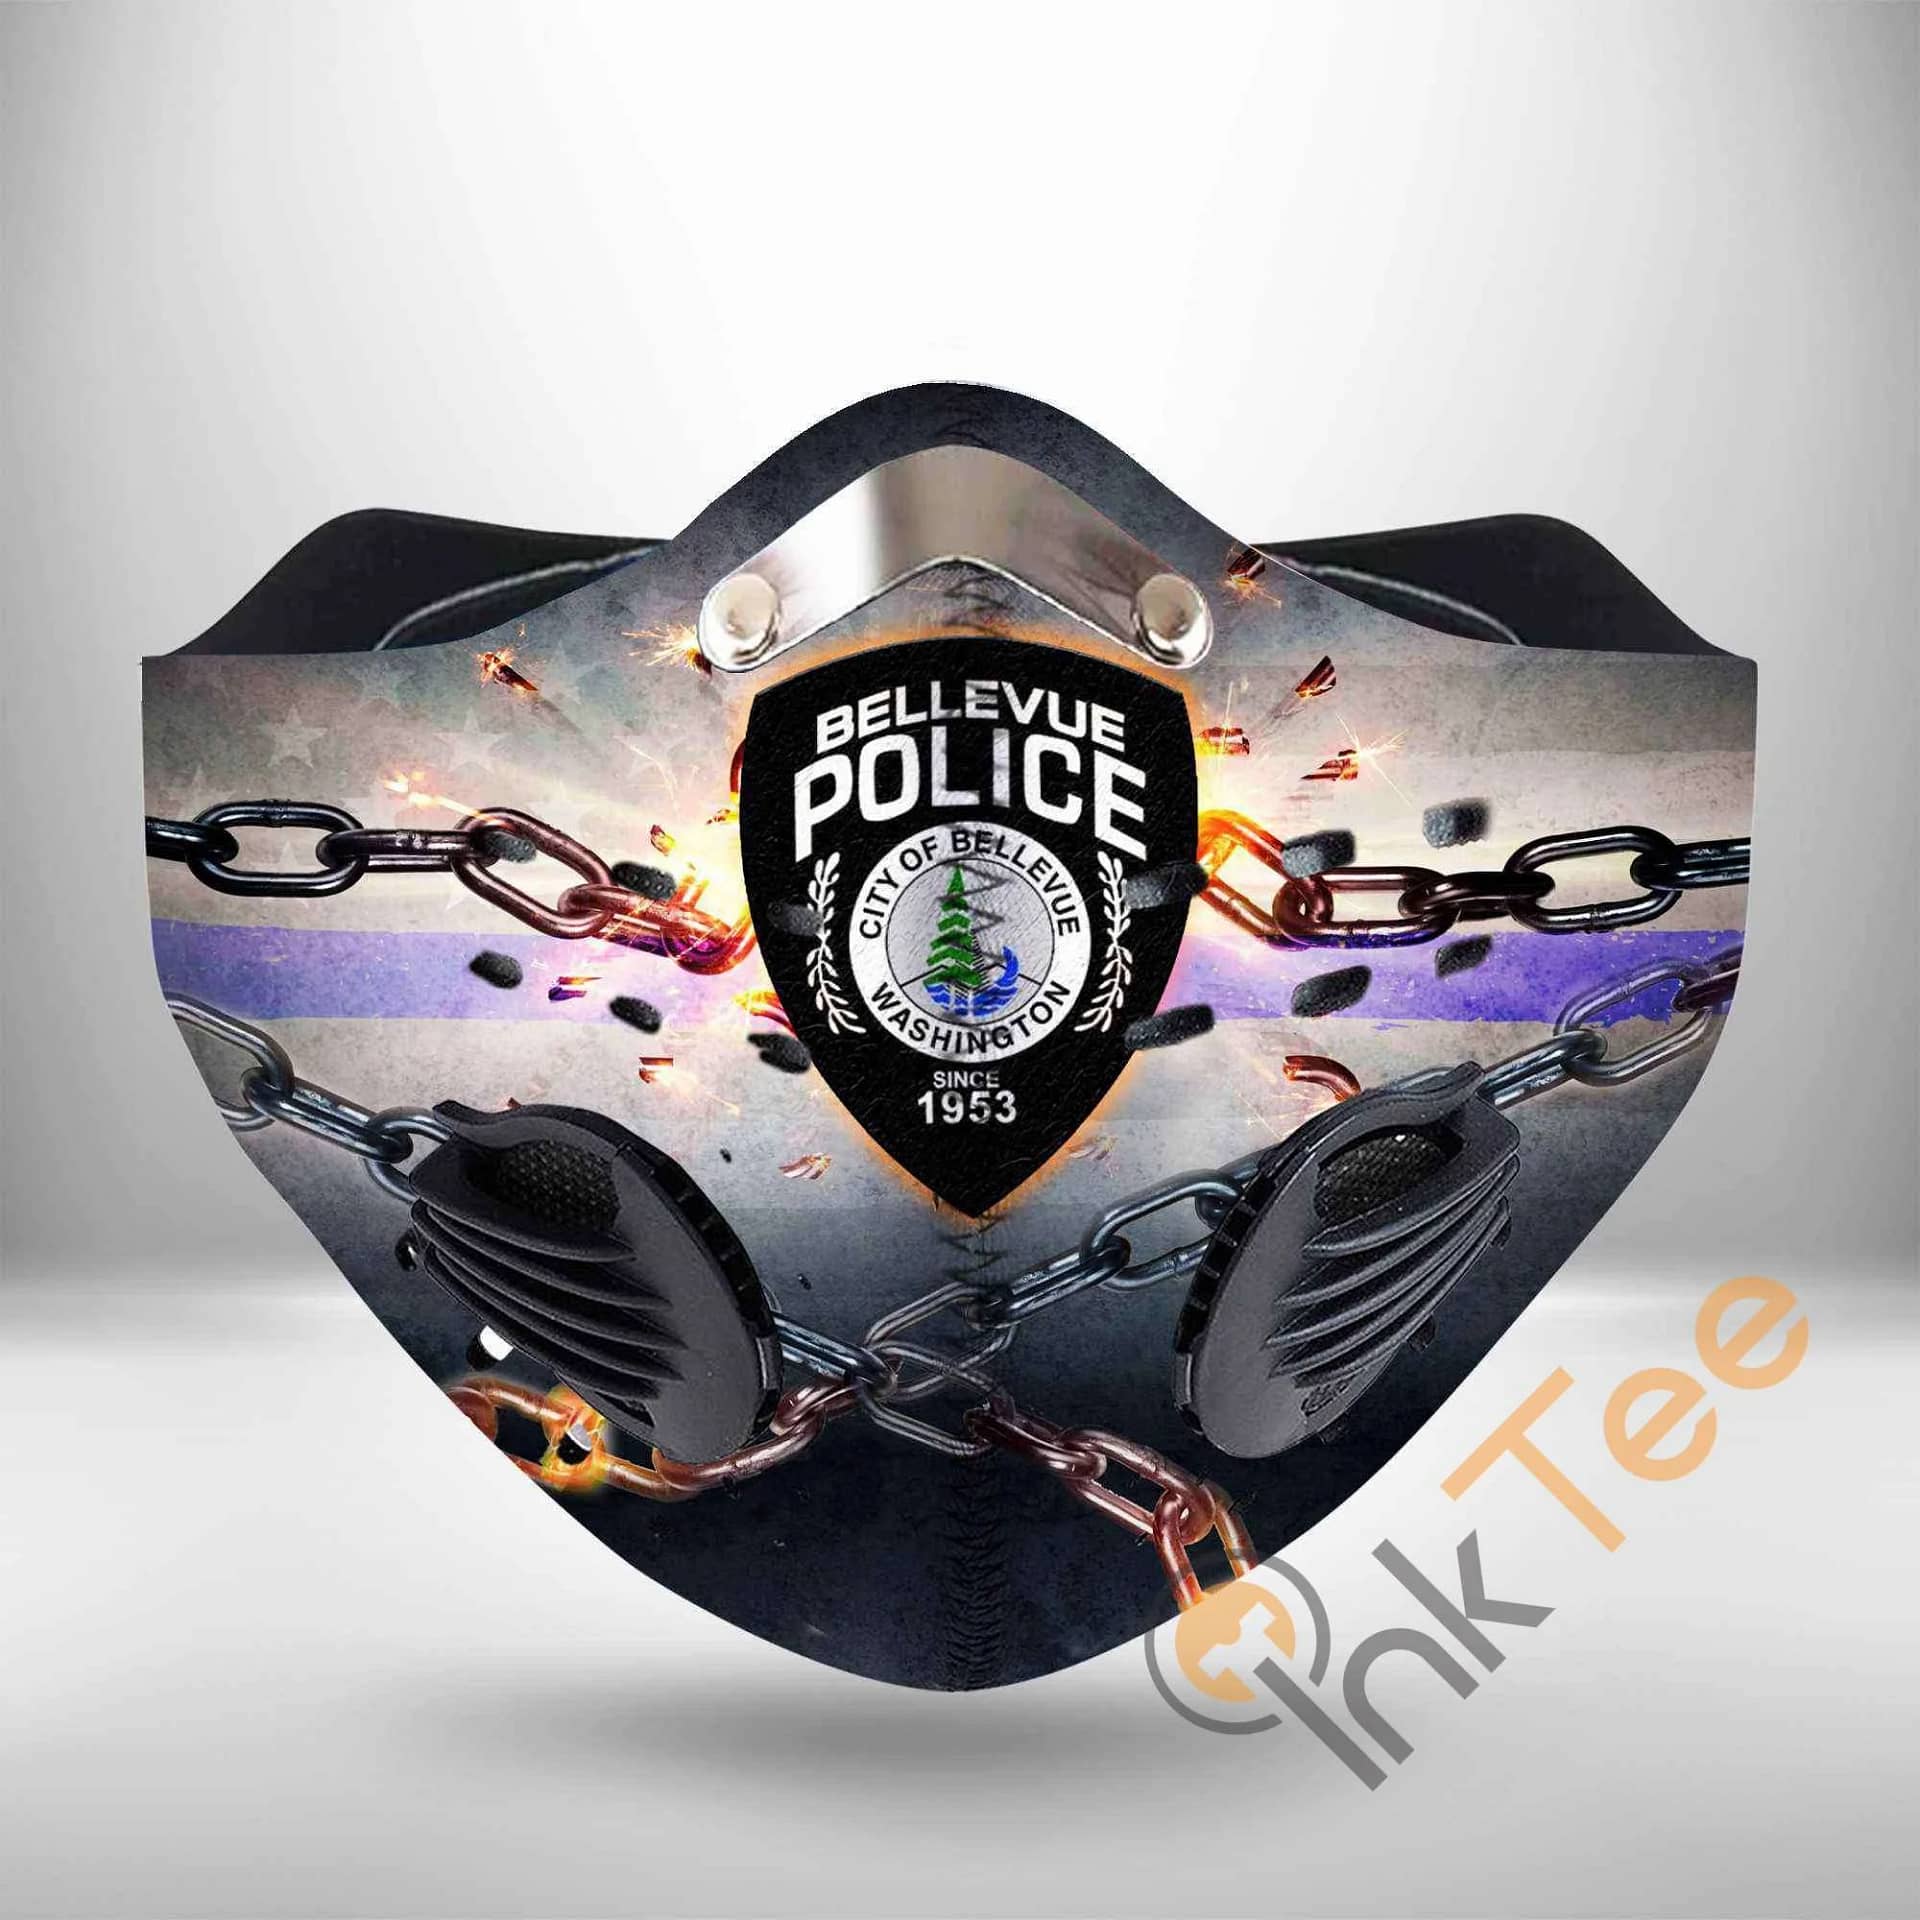 Bellevue Police Department Chain Filter Activated Carbon Pm 2.5 Face Mask